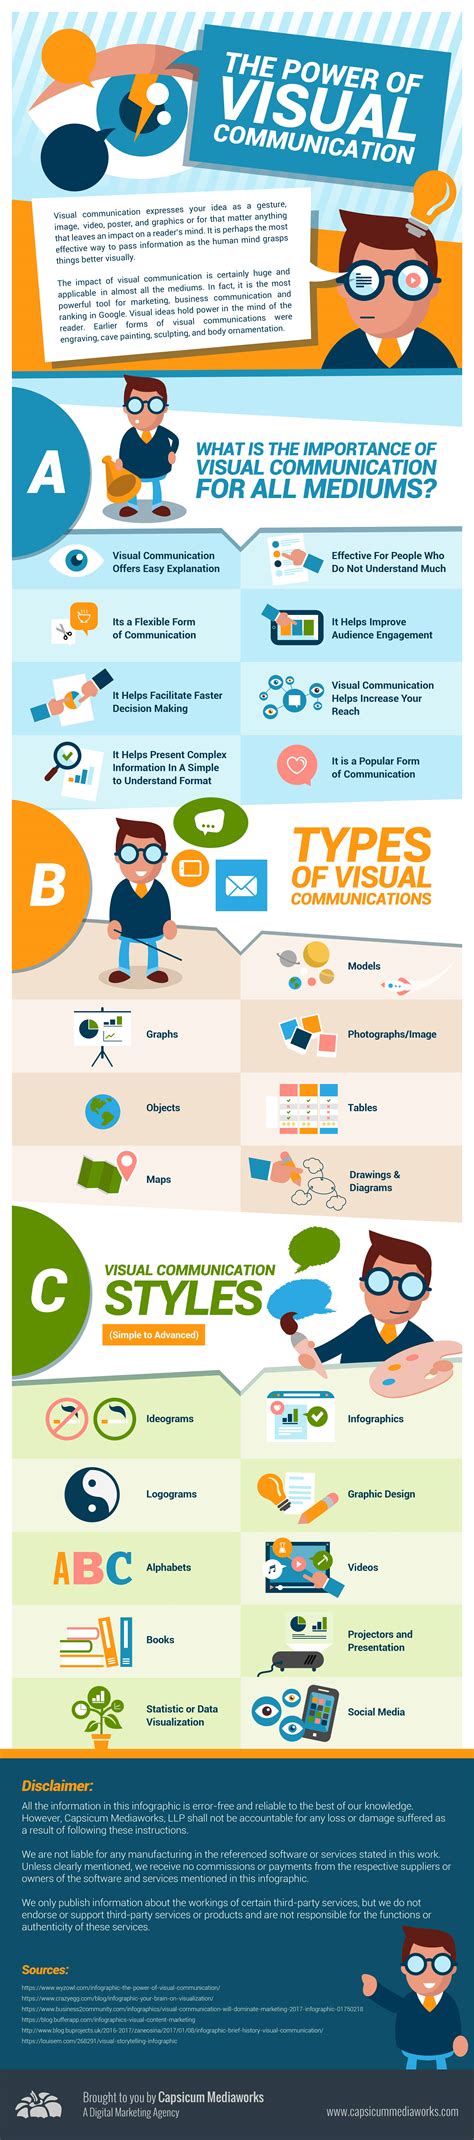 The Power Of Visual Communication In January 2021 Infographic